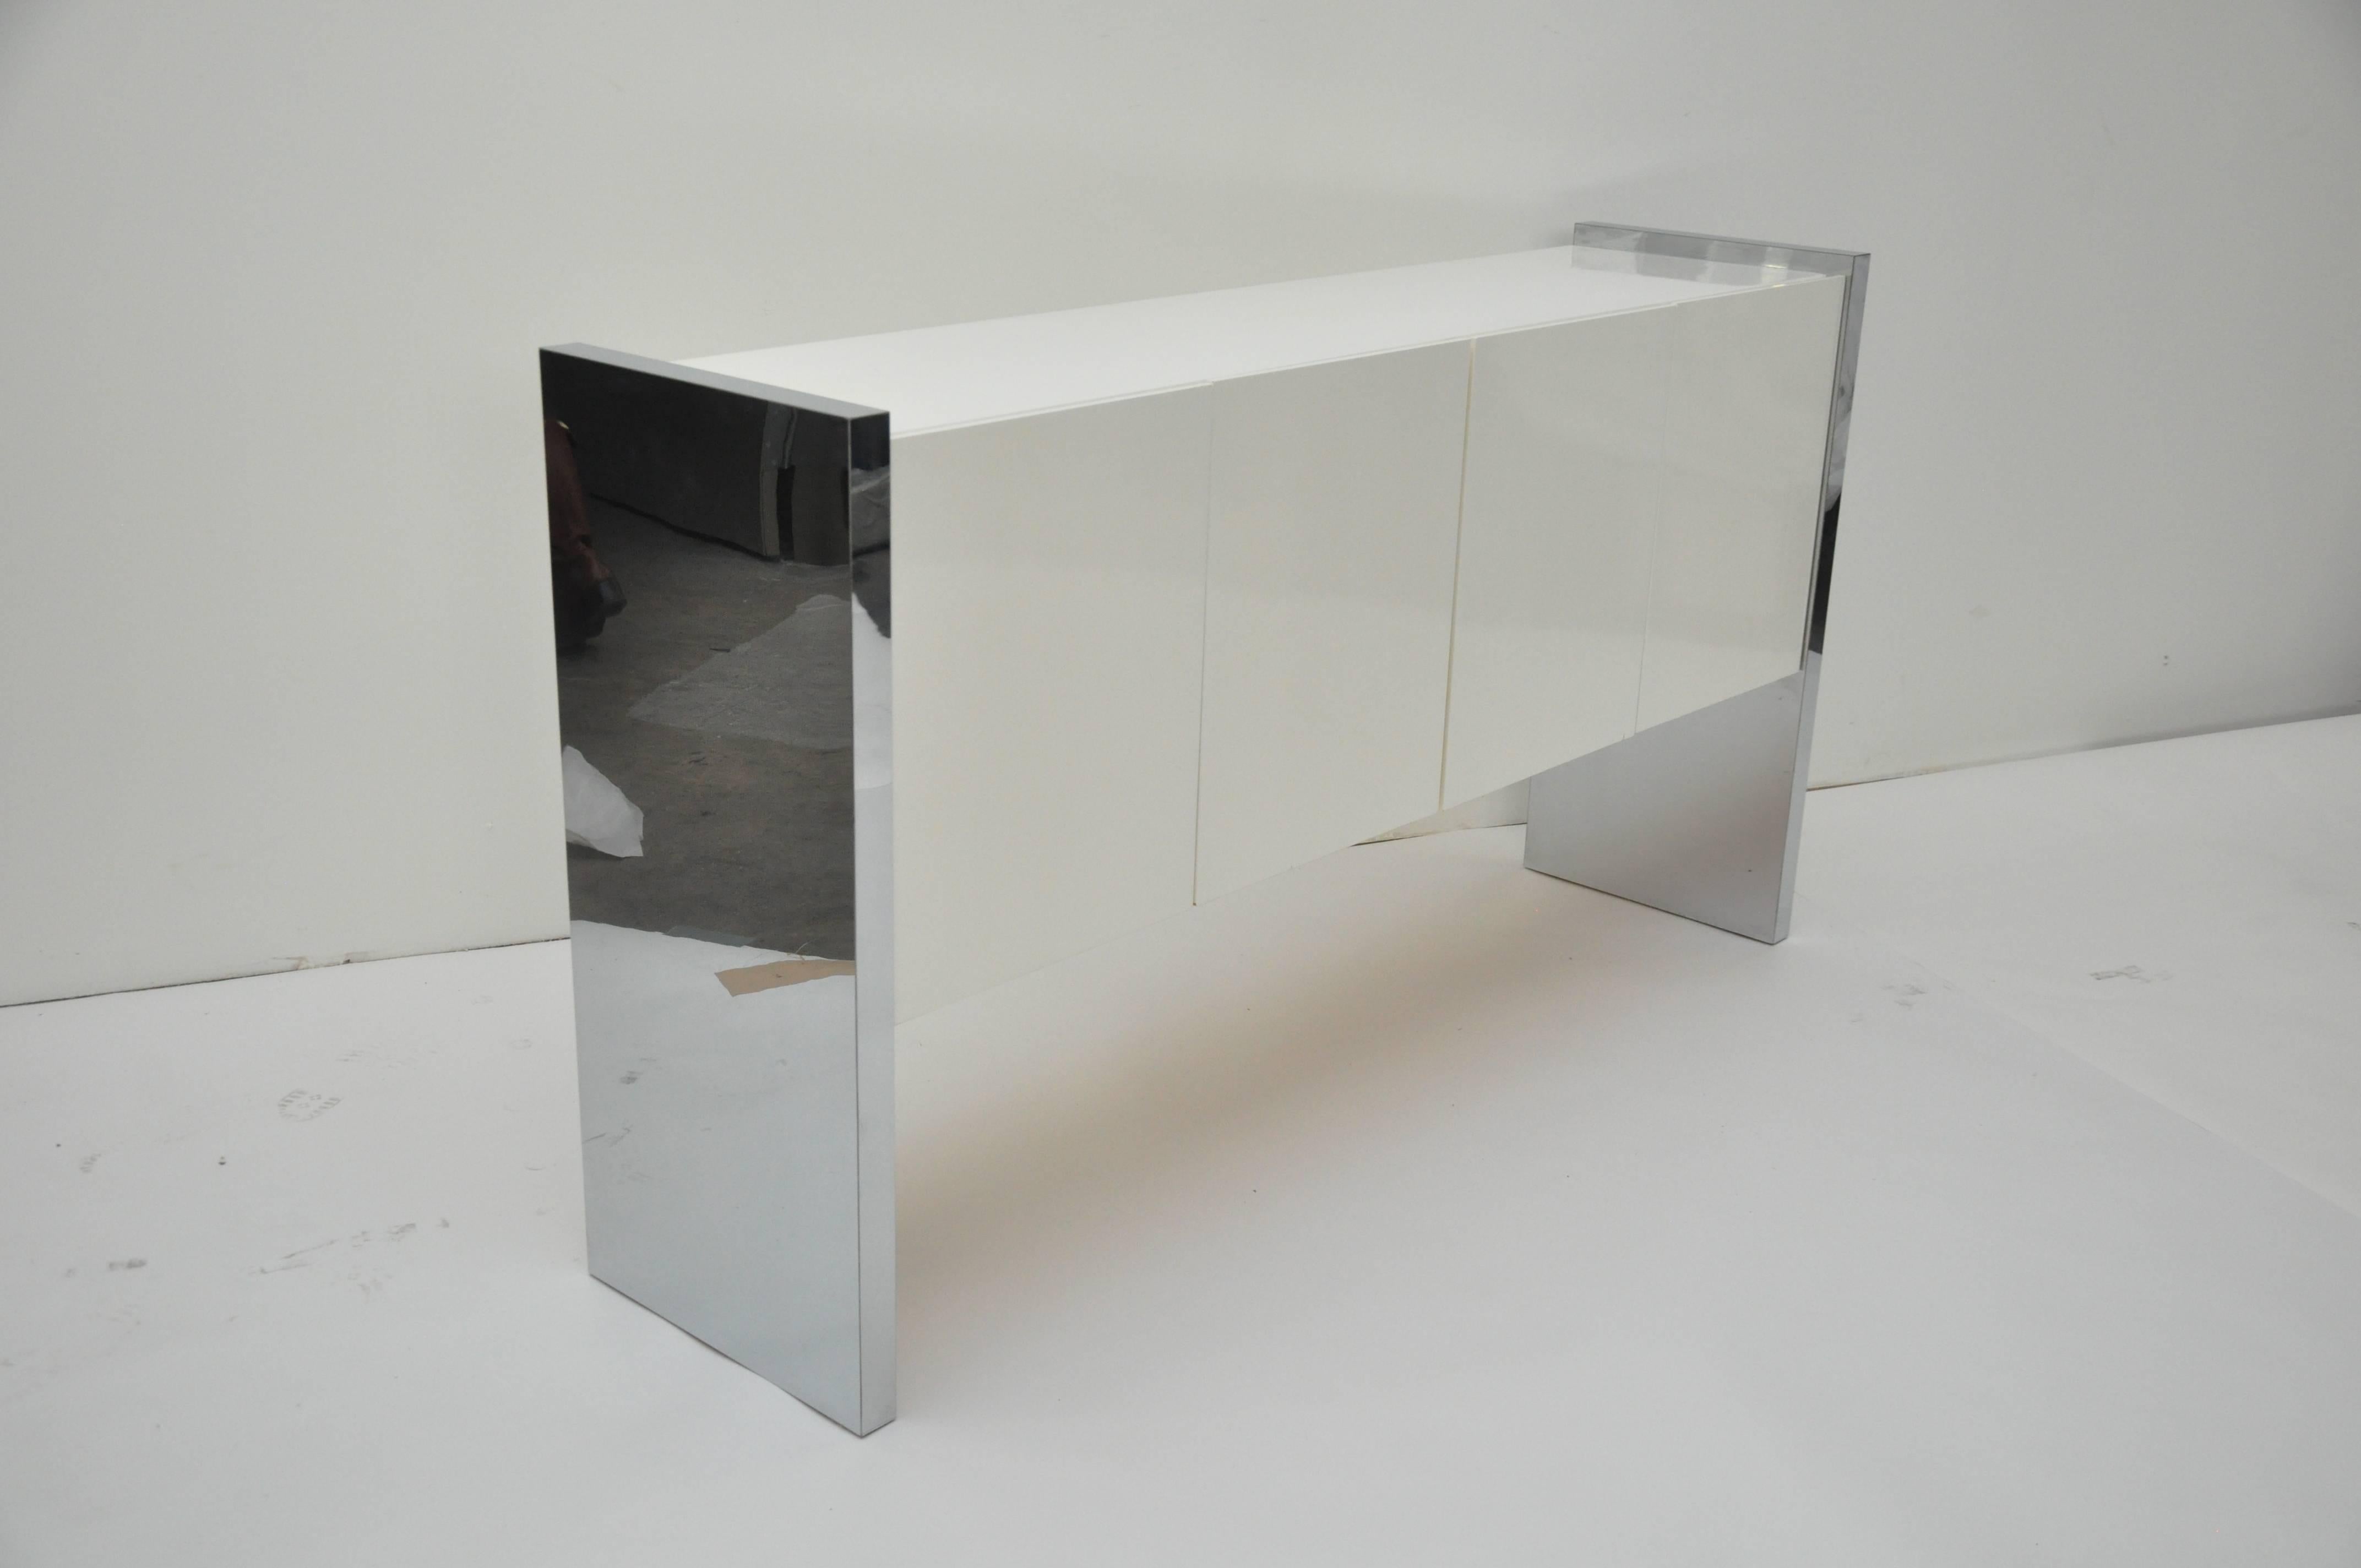 Design Institute of America Mid-Century credenza. Sides of credenza are chrome, four-door cabinet portion is laminate. Credenza has two slide out drawers and shelving.